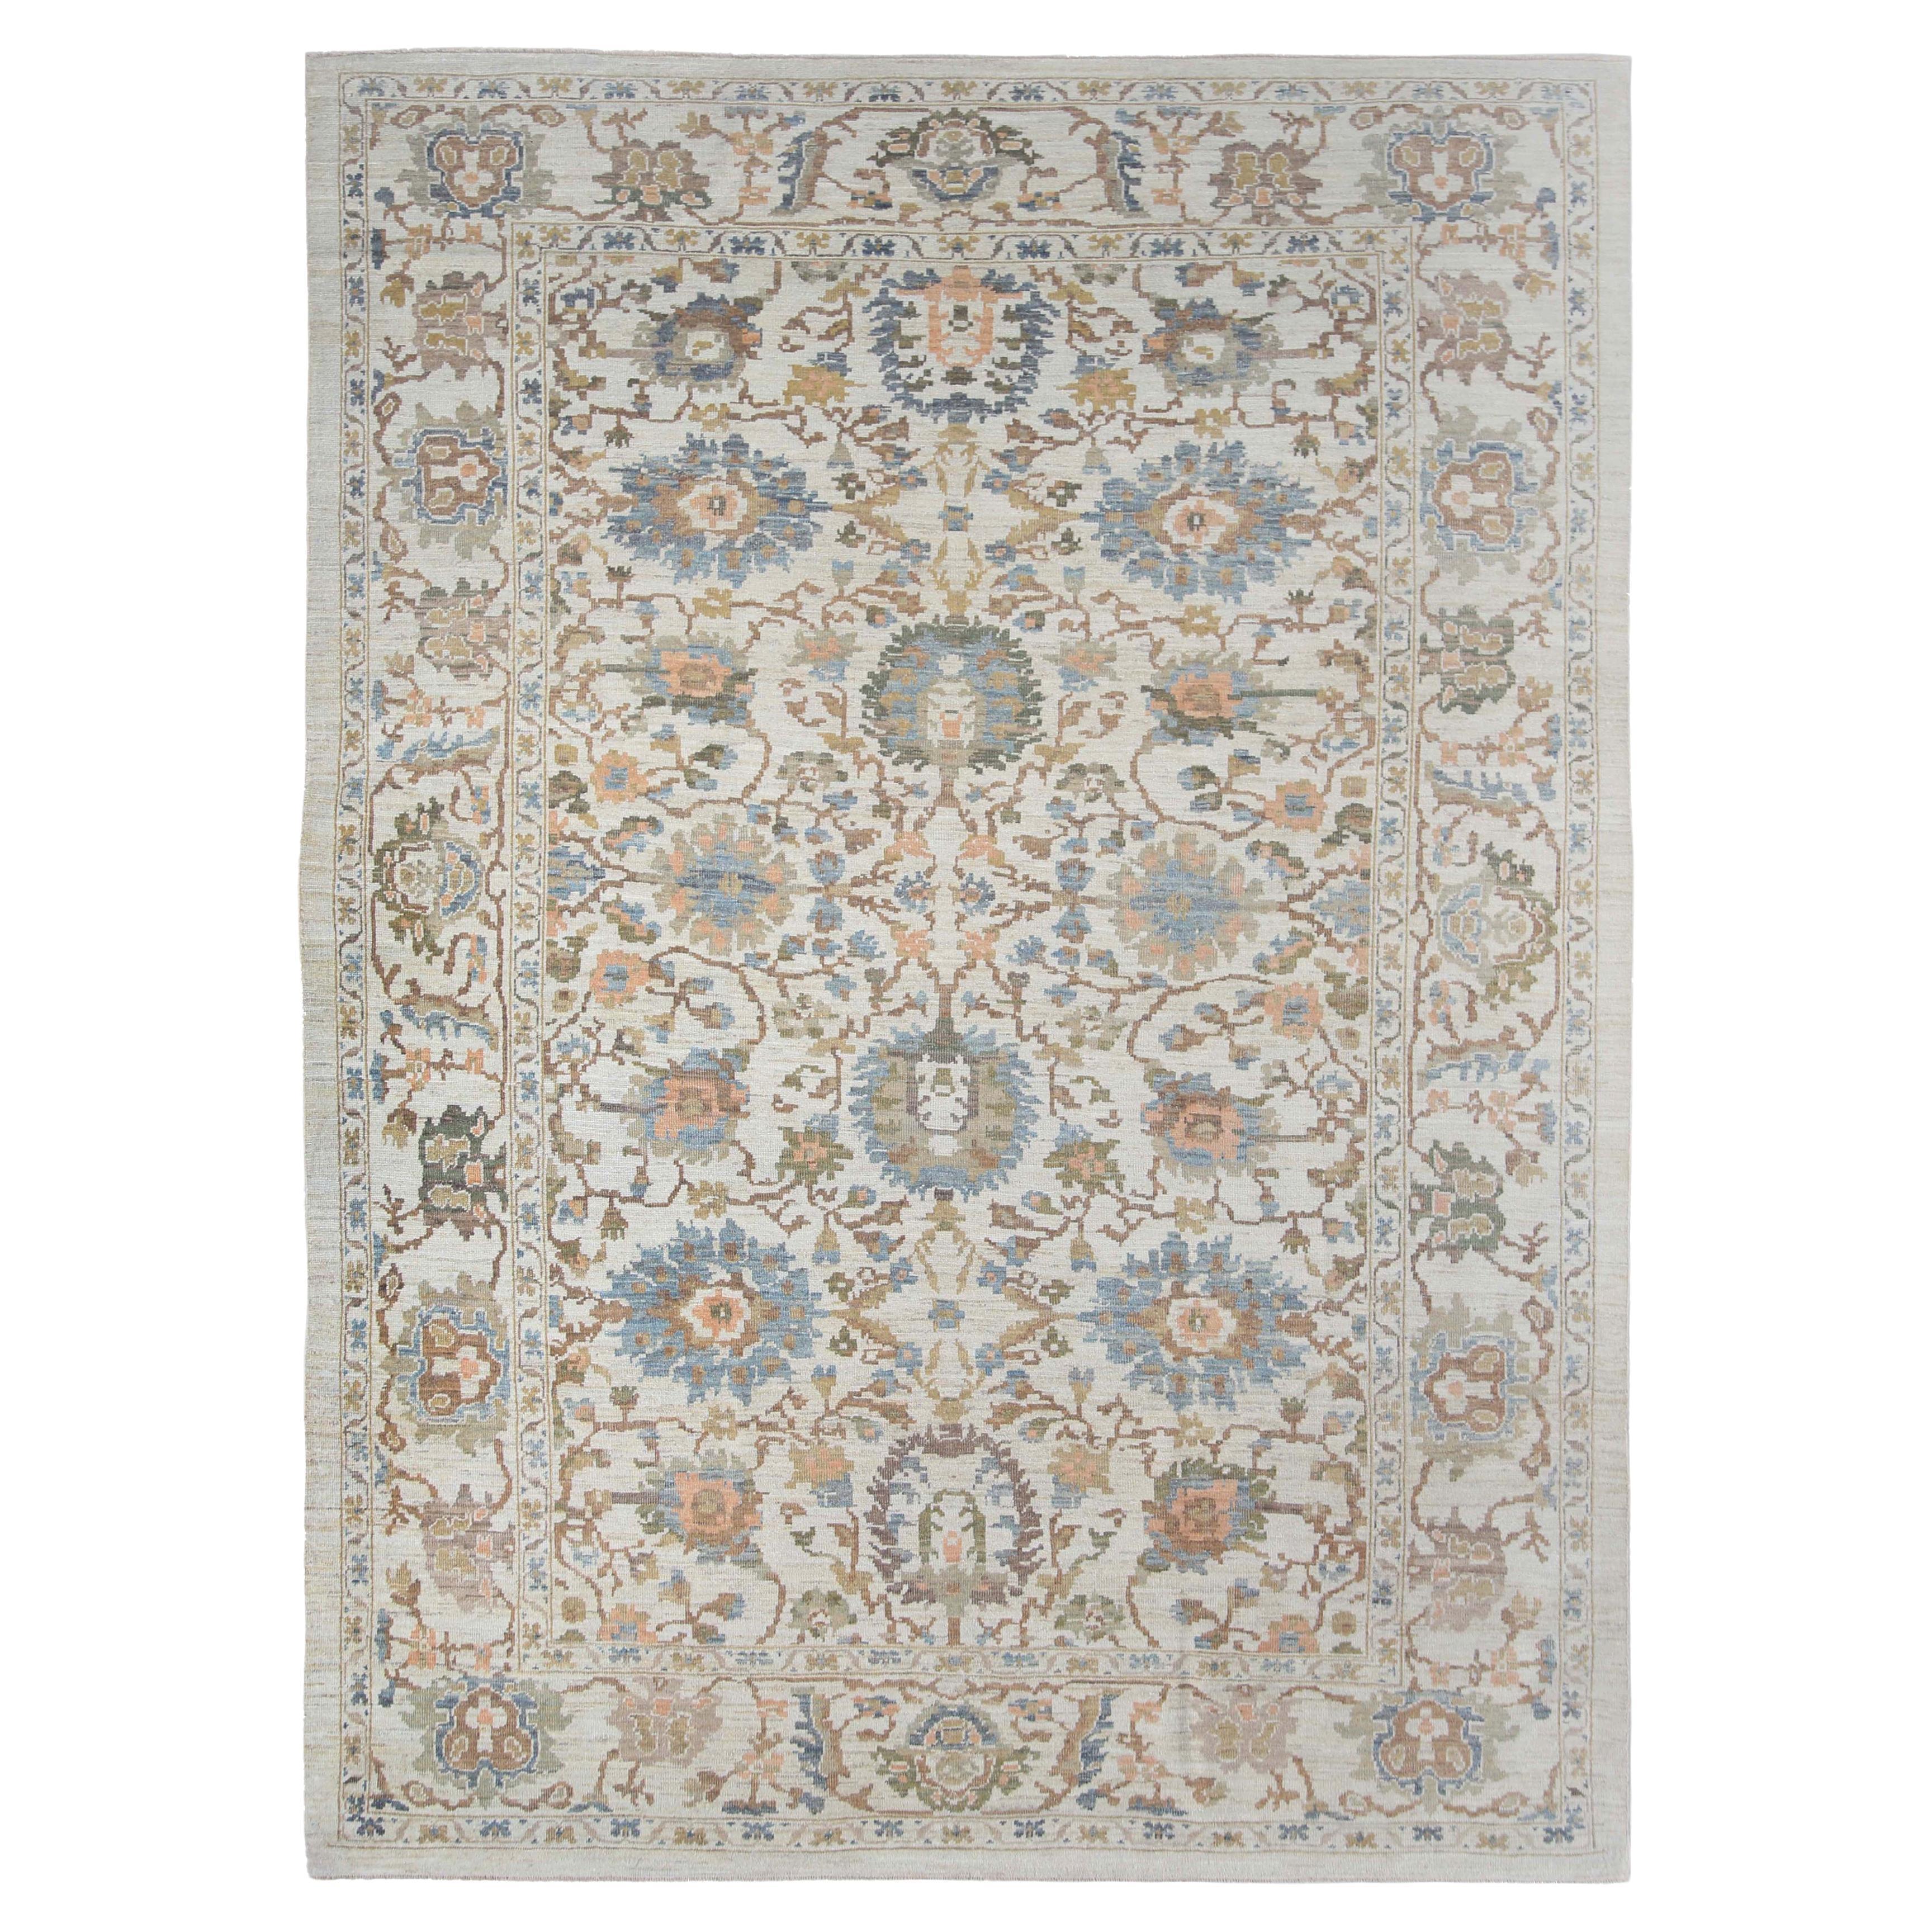 Classic Sultanabad Design Handmade Rug with Cool Tones For Sale